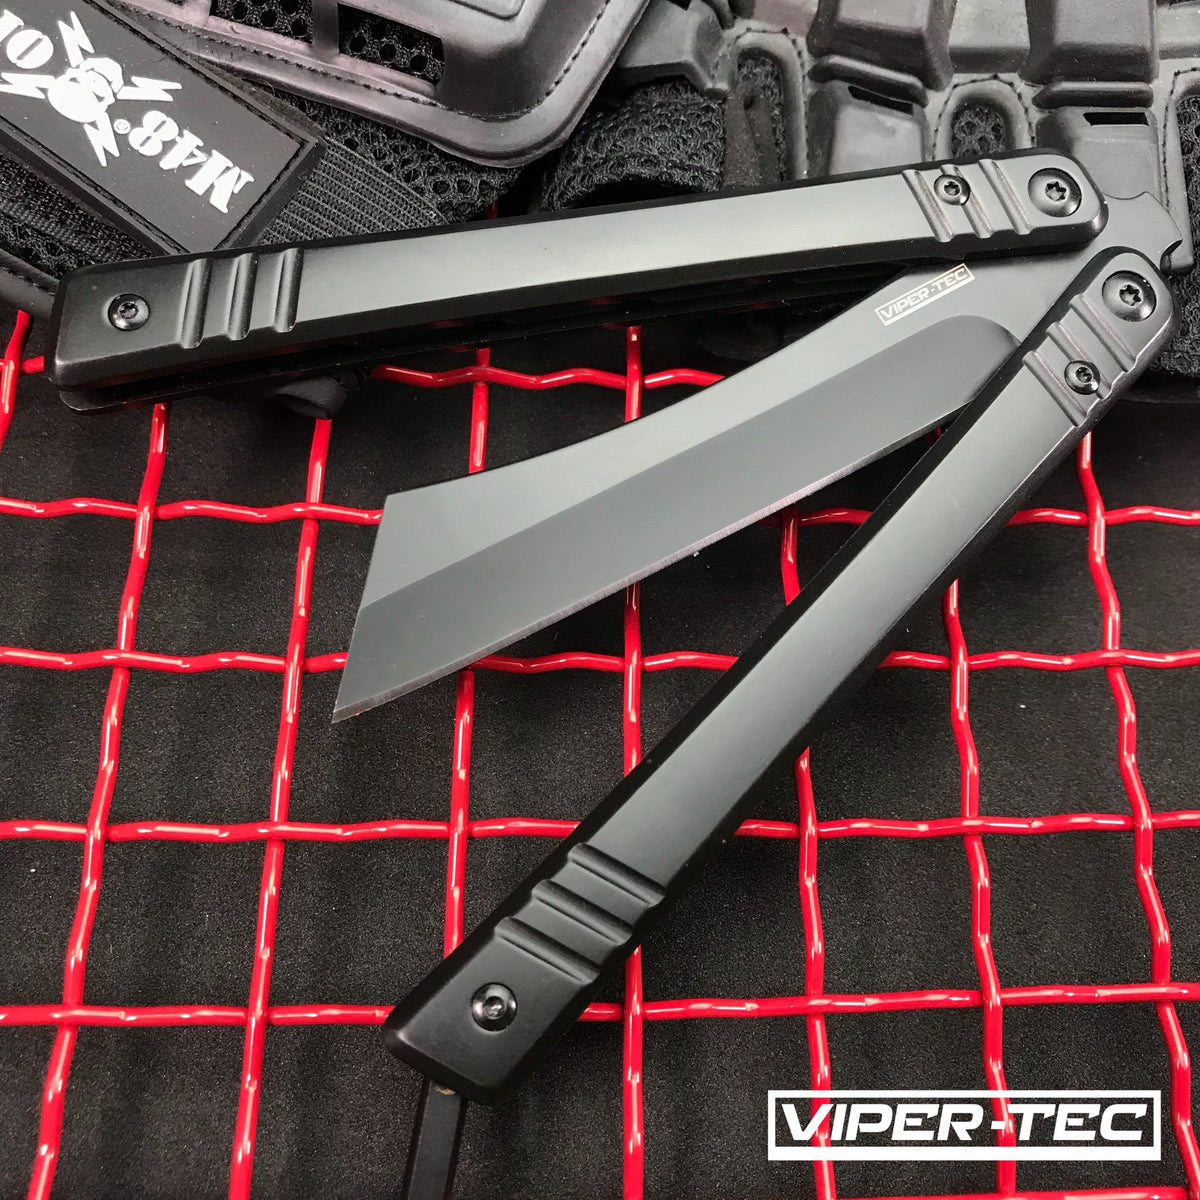 Cleaversong Butterfly Knife - Viper Tec